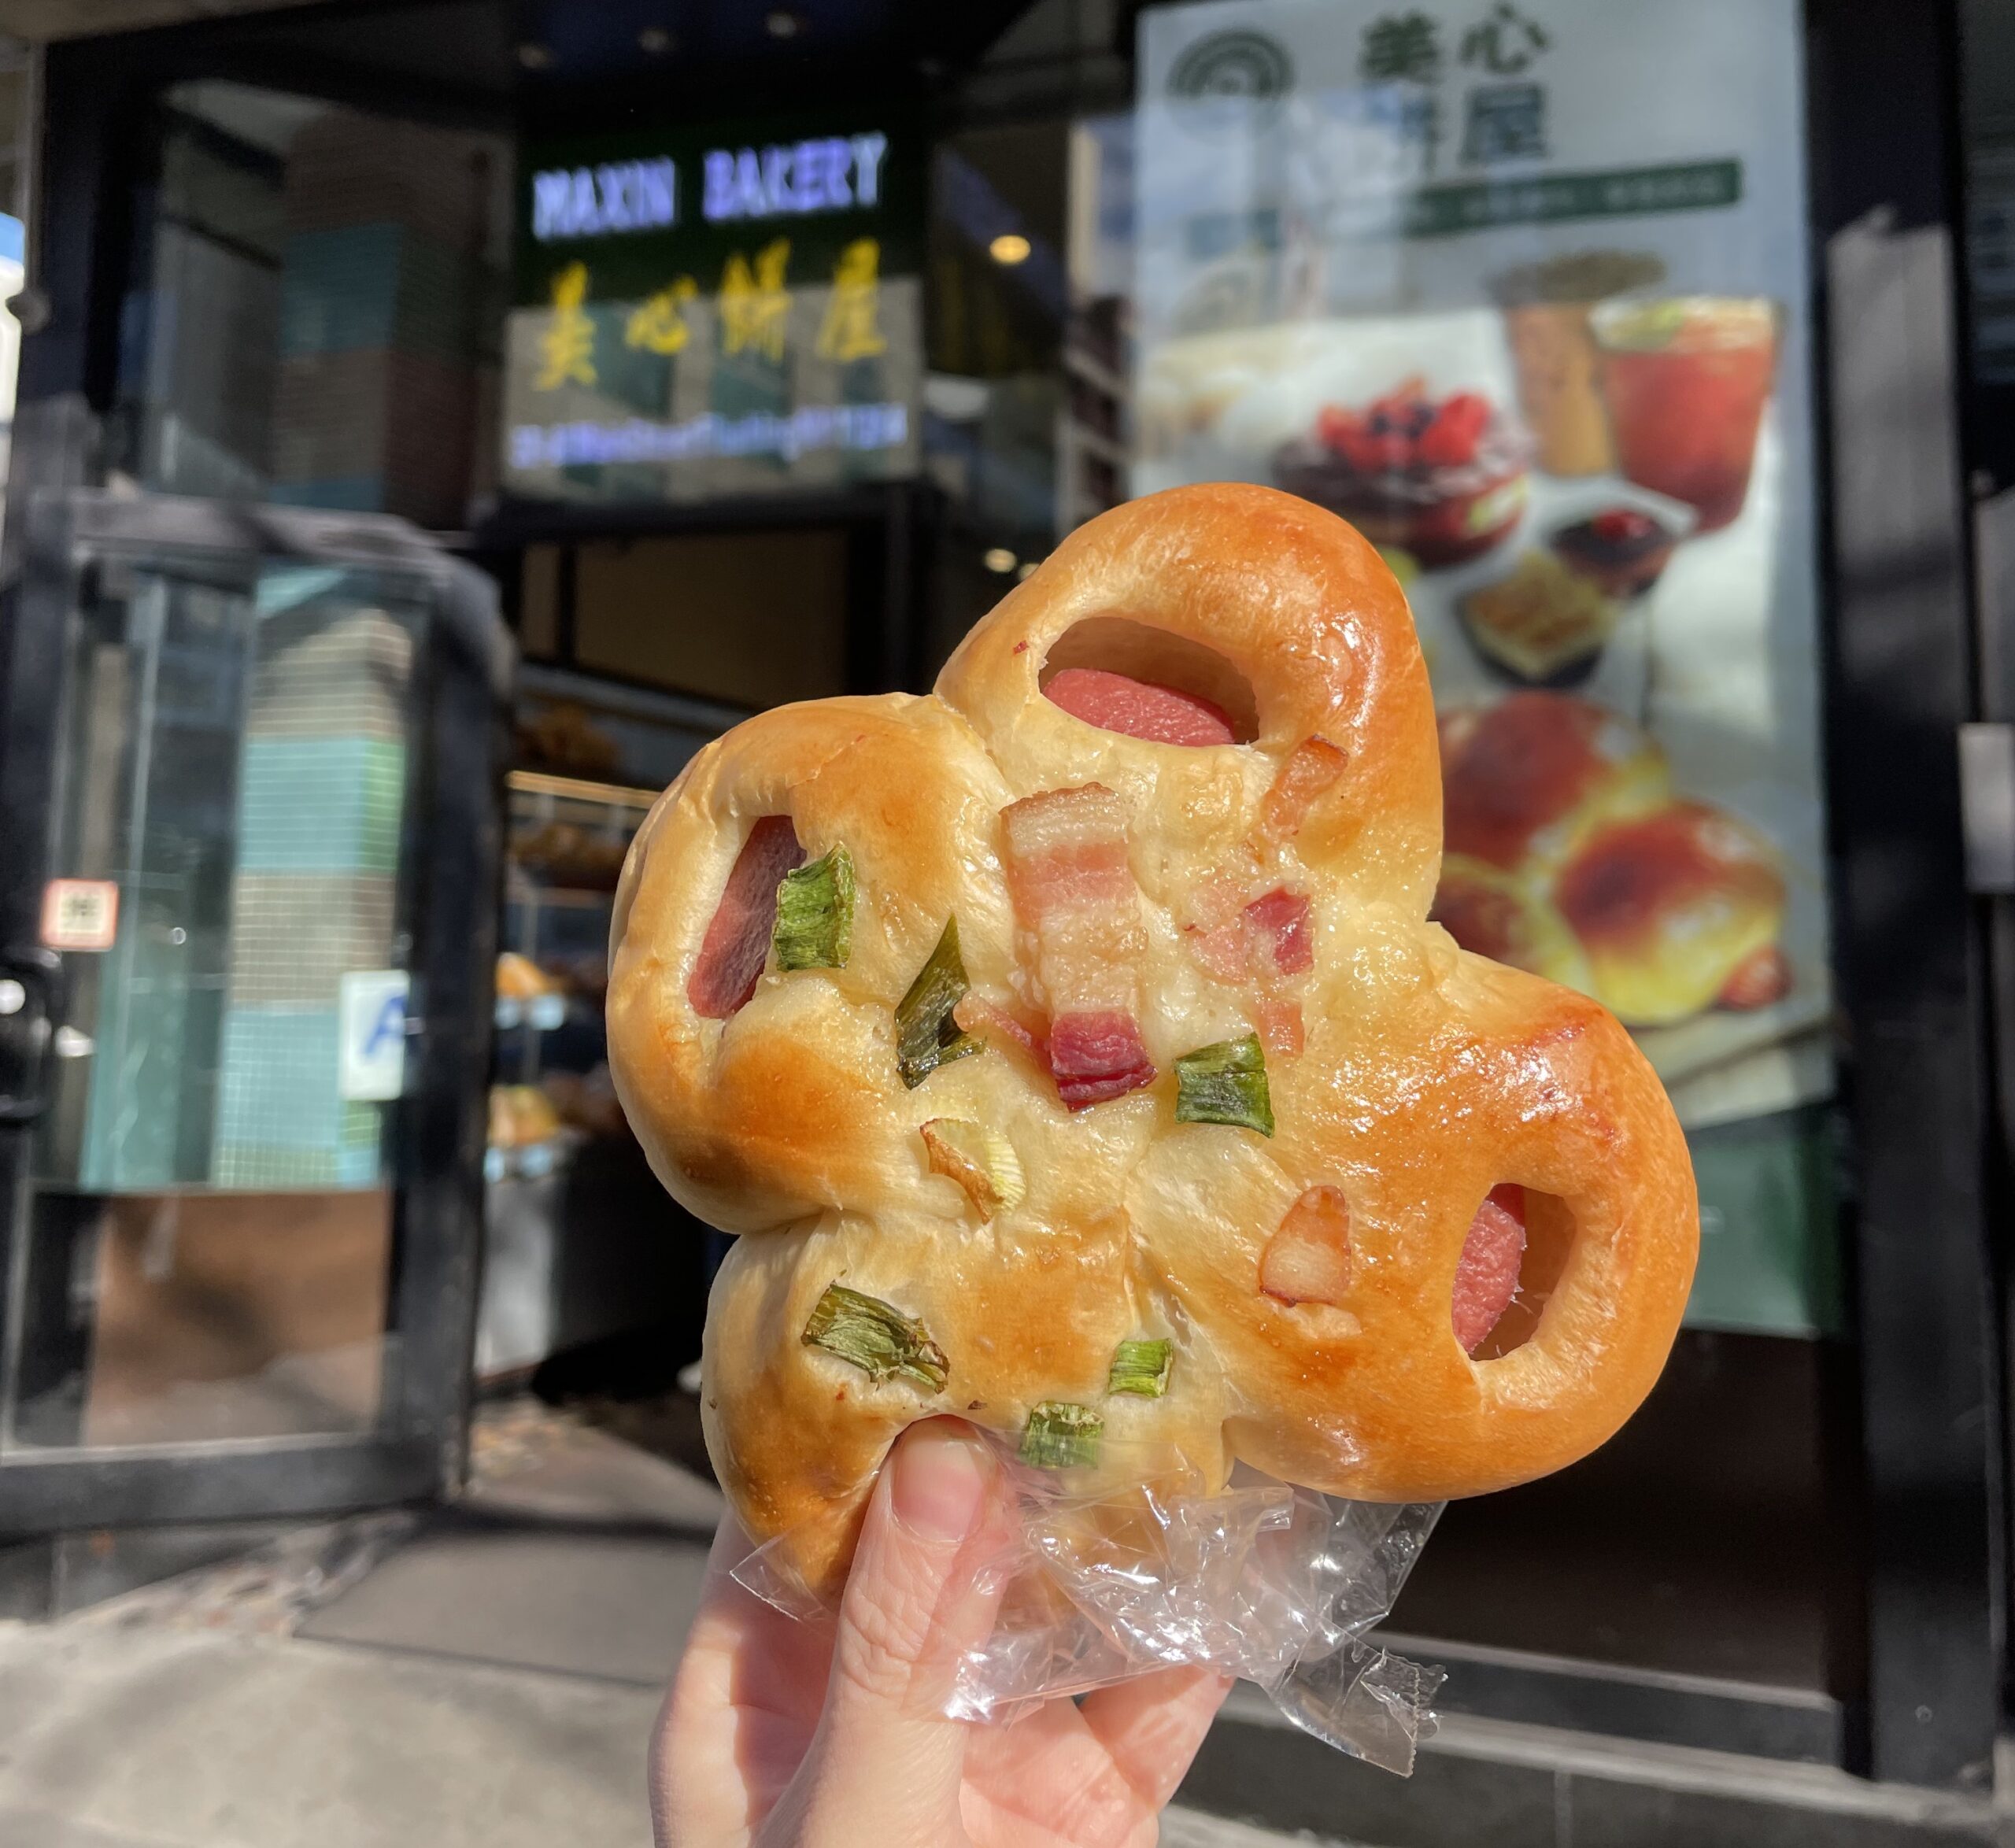 Flower-shaped hot dog bun from Maxin bakery in Flushing, Queens